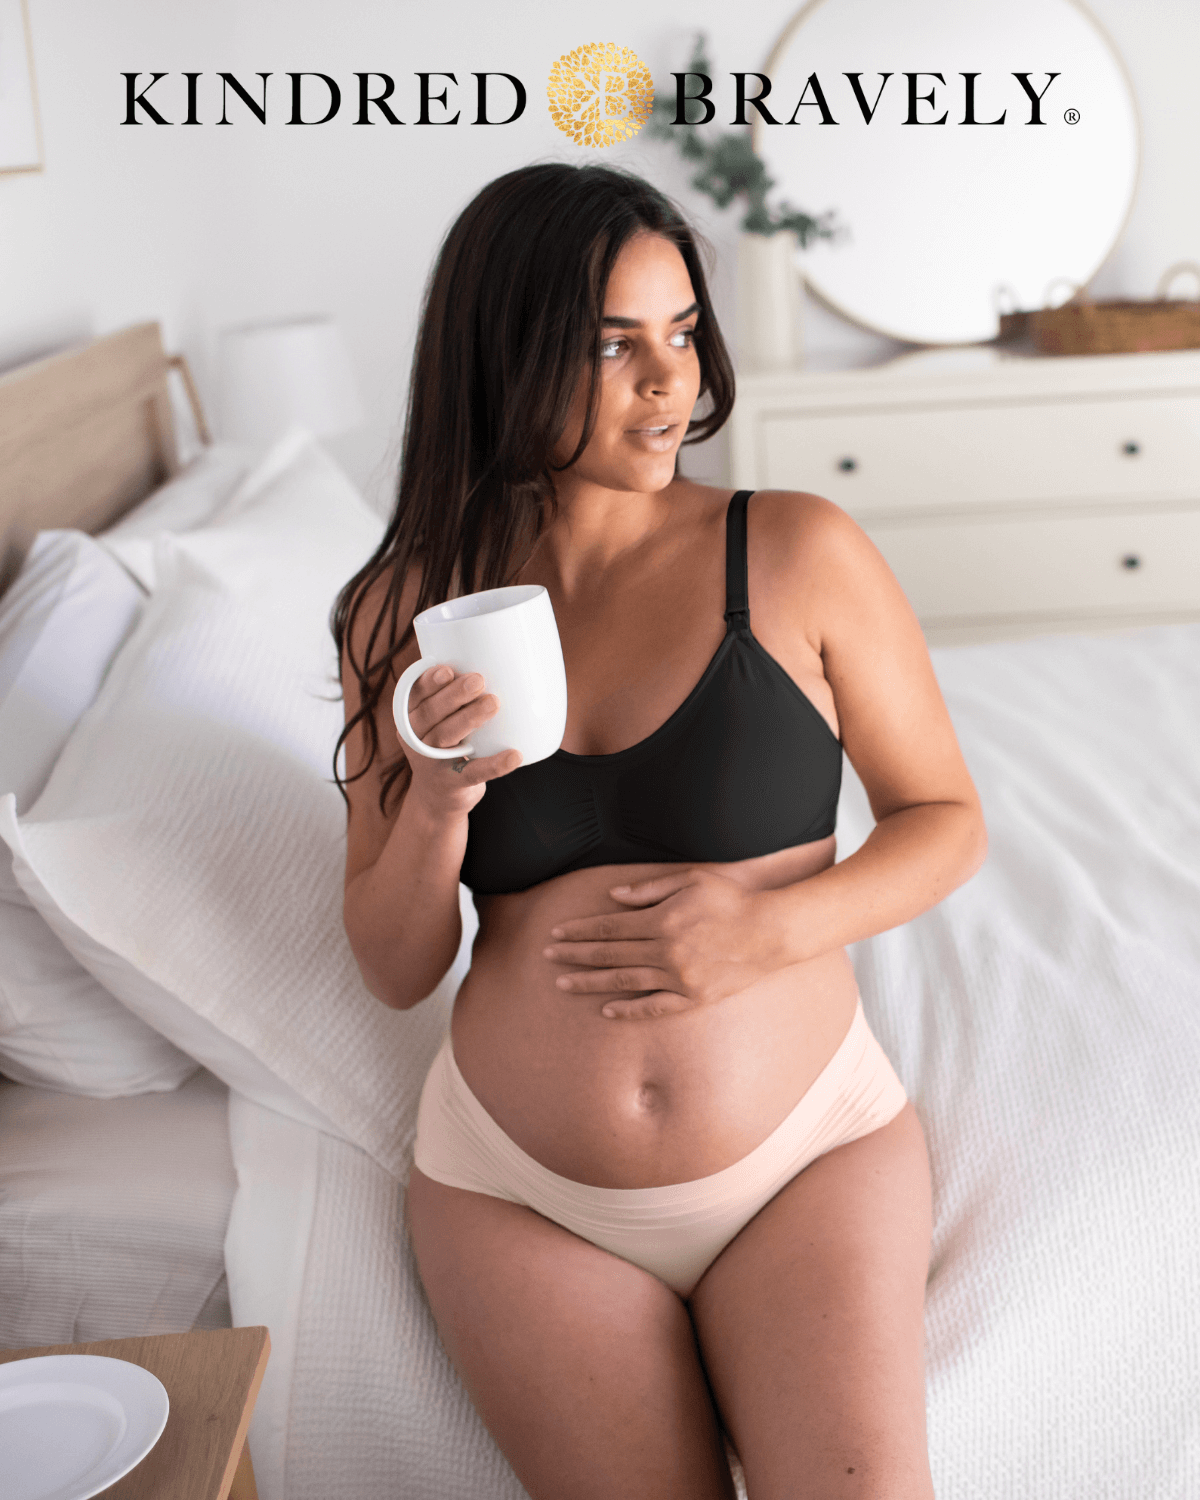 Kindred Bravely: Meet the Grow with Me Underwear Collection